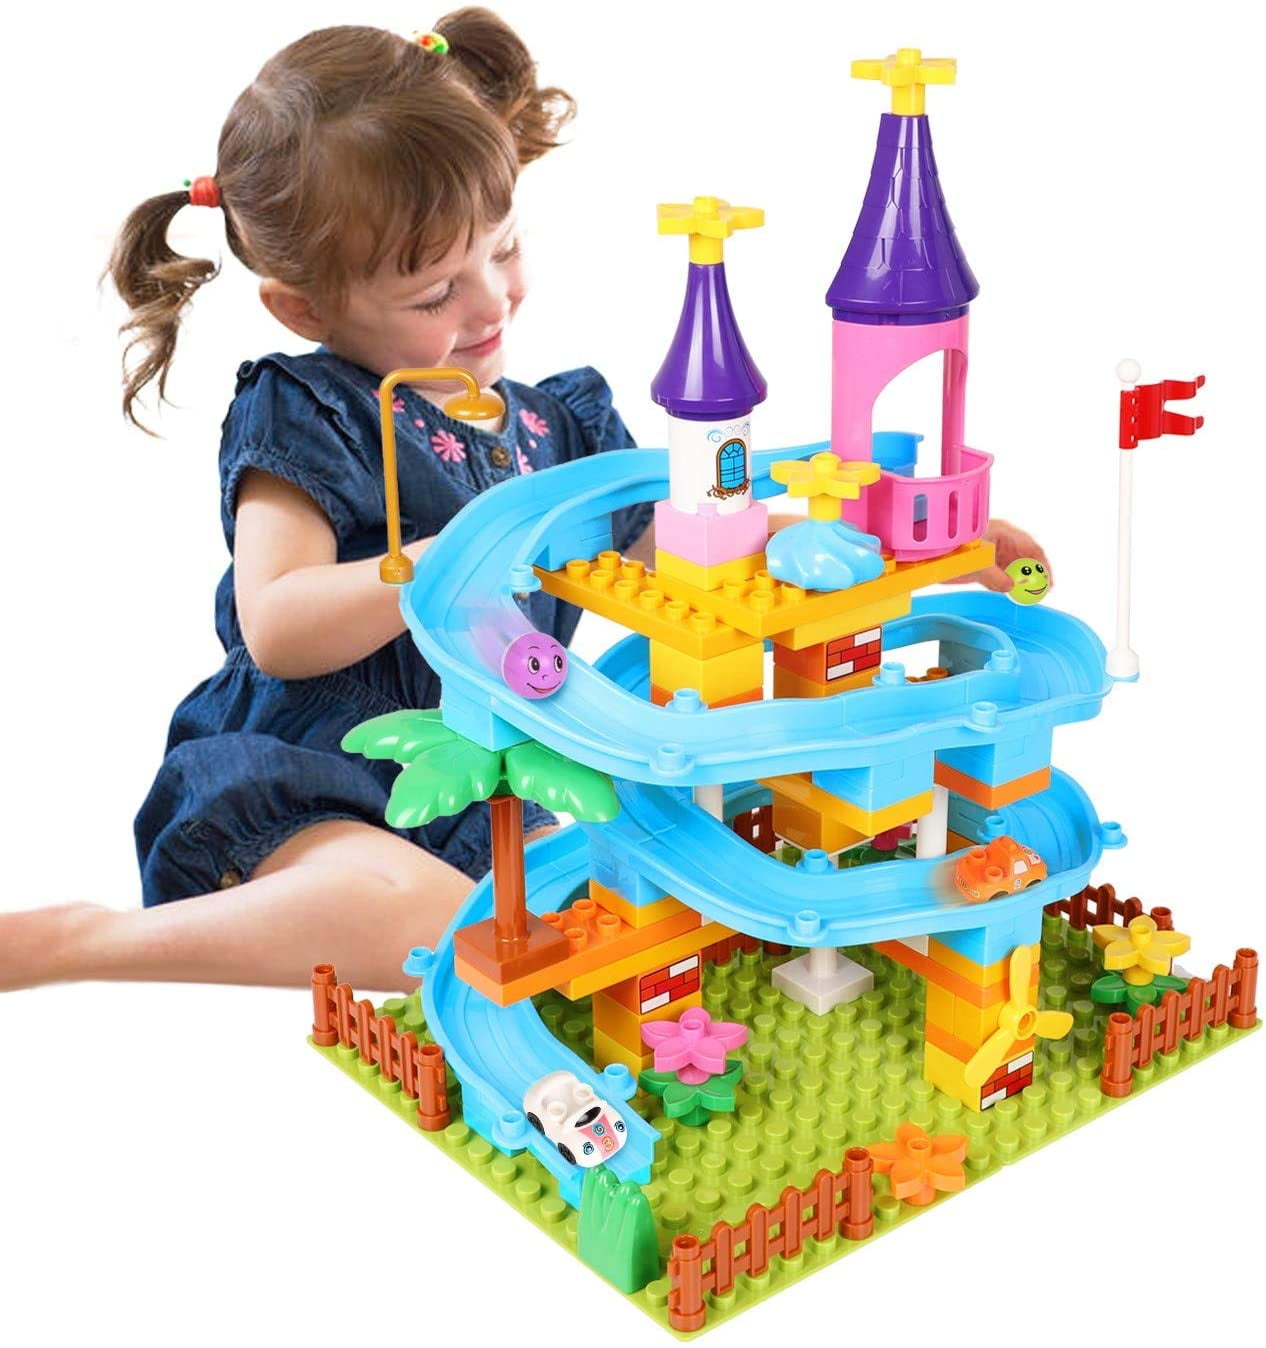 Mini STEM Dining Cart Foods Stacking Bricks 117 Pcs Building Blocks Toy Set Christmas Birthday Gifts for Toddlers Kids Boys Girls Age 3 4 5 6 7 8 9 10 